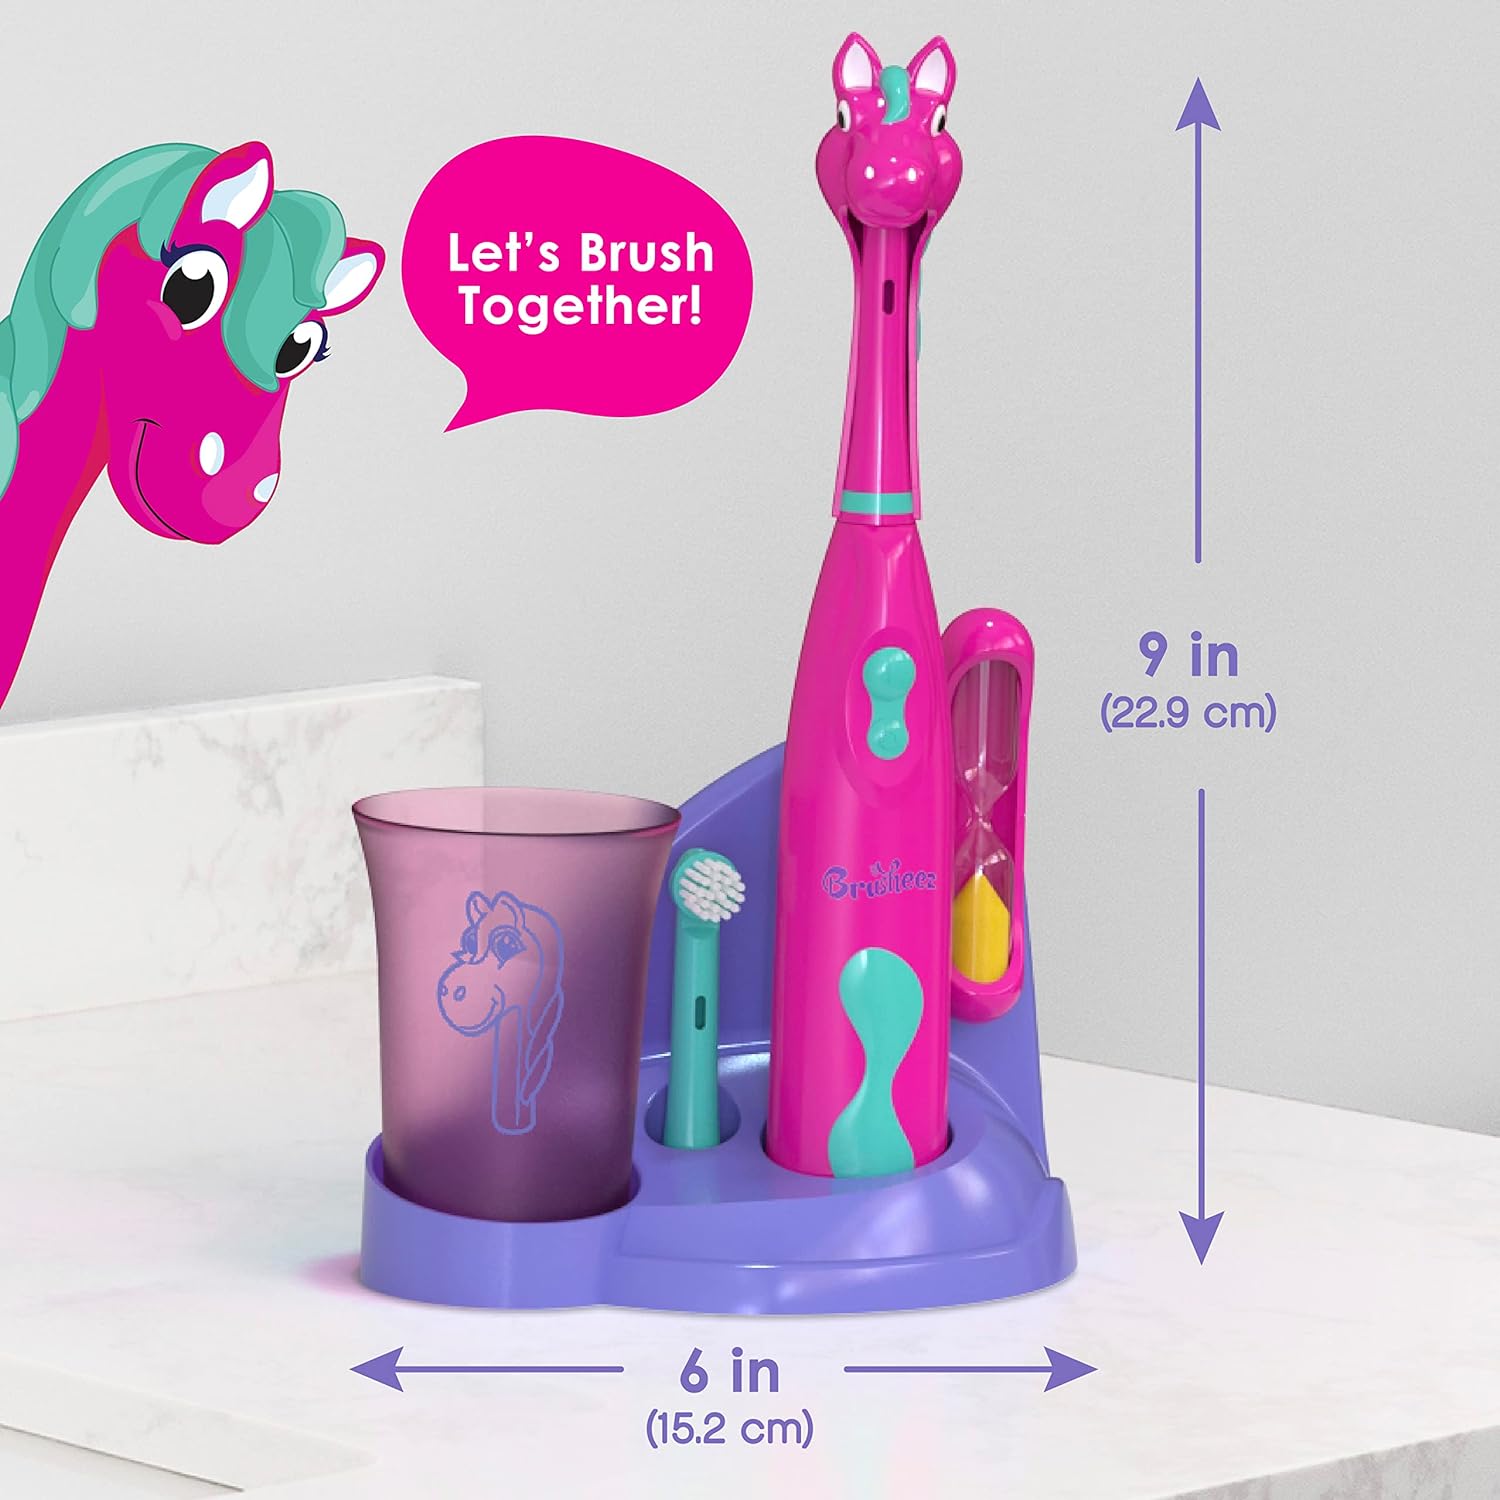 Brusheez - Childrens Electric Toothbrush Includes Toothbrush, Adorable Head Cover, 2 Toothbrush Heads, 2-Minute Sand Timer, and Holder Stand - Prancy the Pony